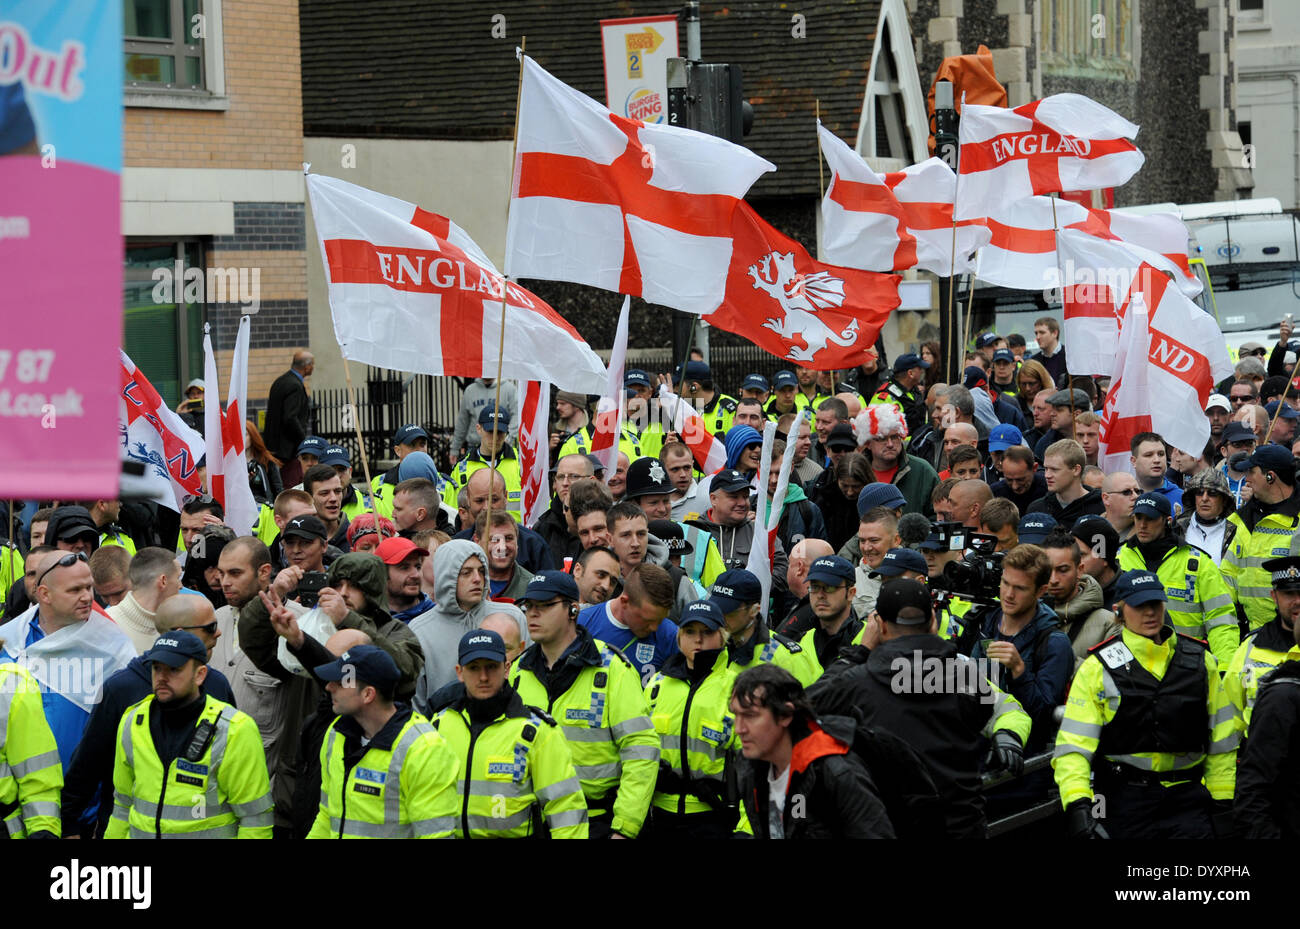 Police ta the The March for England Rally in Brighton in 2014v Stock Photo